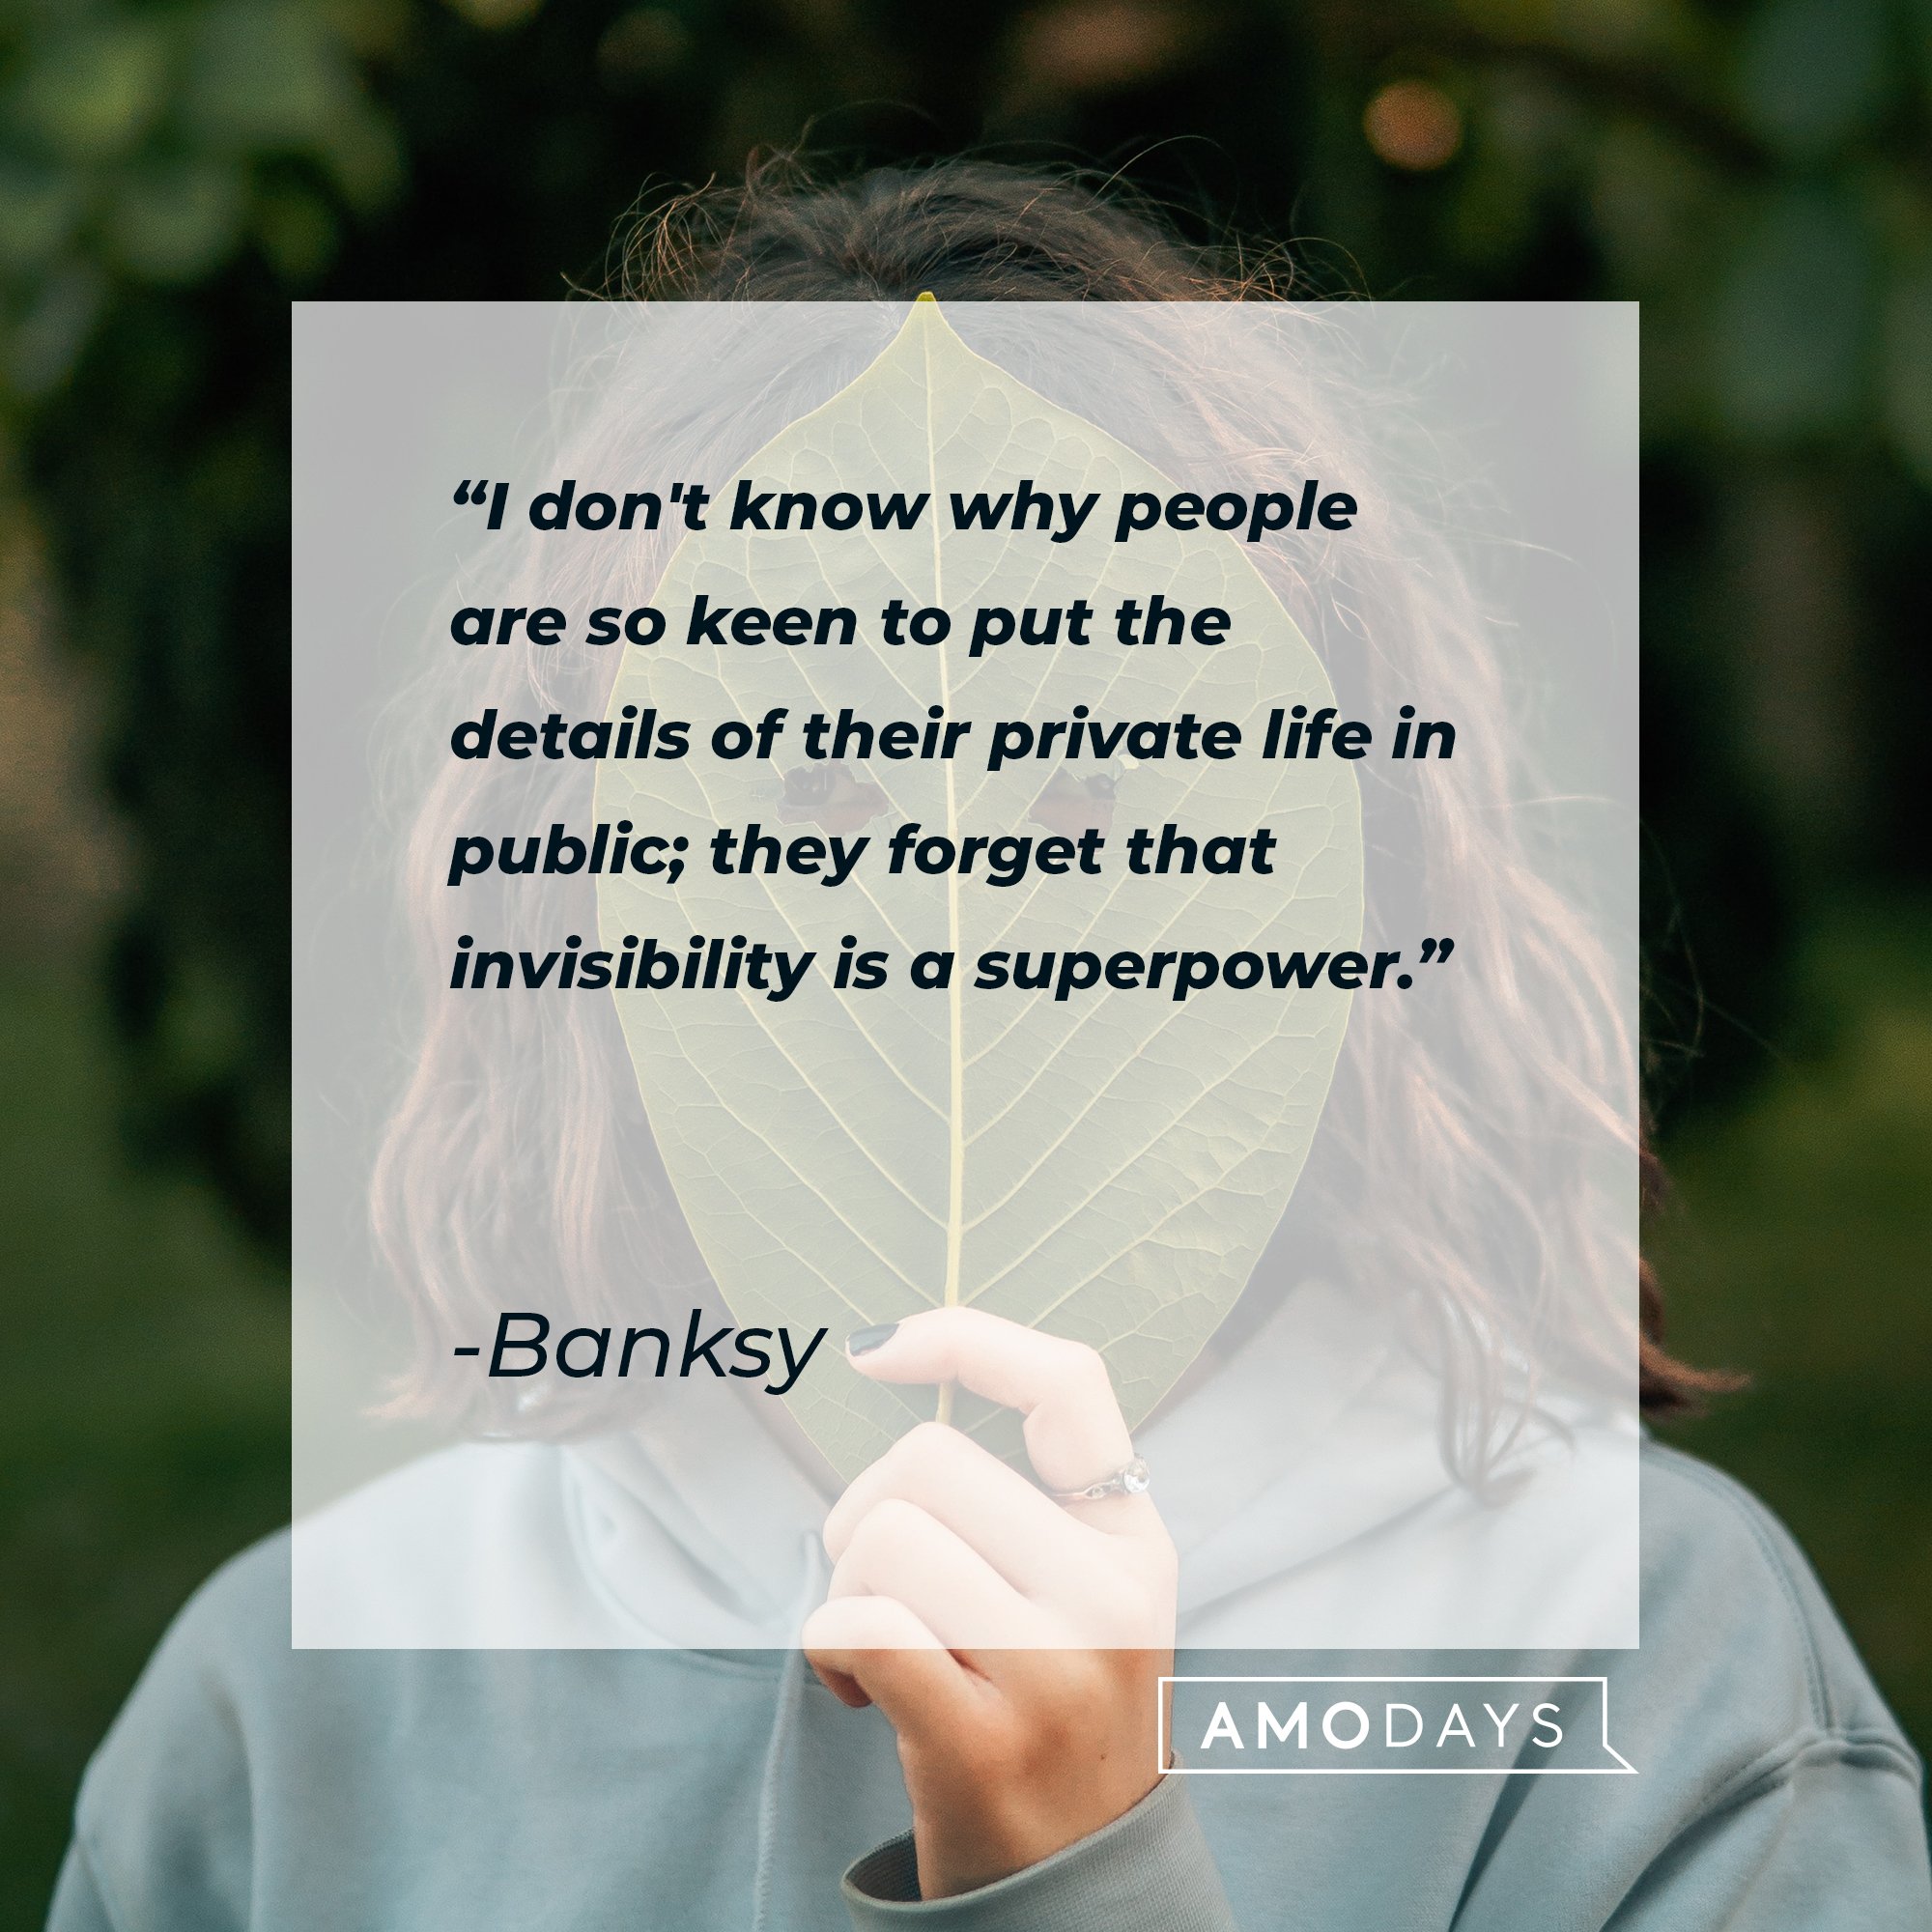 Banksy’s quote: "I don't know why people are so keen to put the details of their private life in public; they forget that invisibility is a superpower."  | Image: AmoDays 